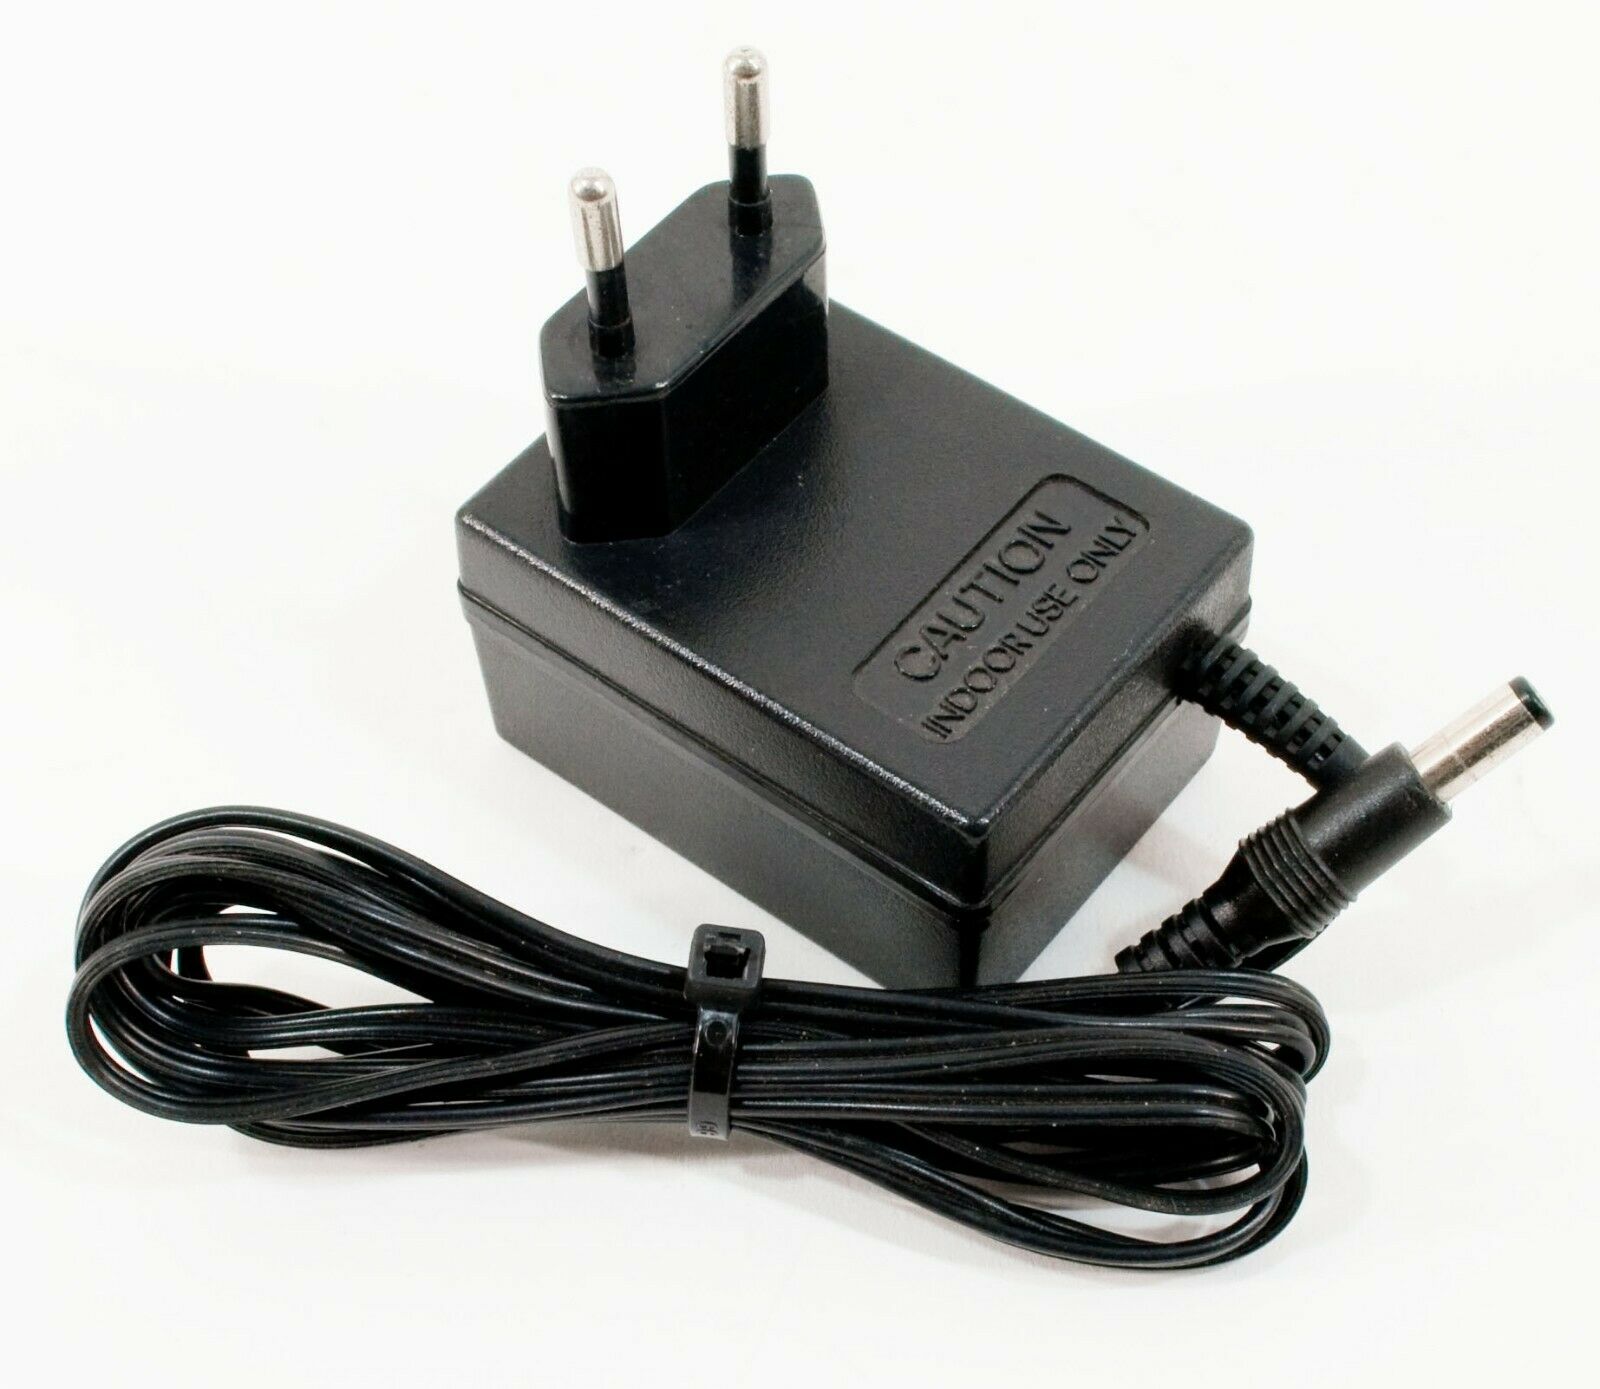 LF12150D-3513 AC Adapter 12V 150mA Original Charger Power Supply Type: Power Adapter UPC: Does not apply Compatible